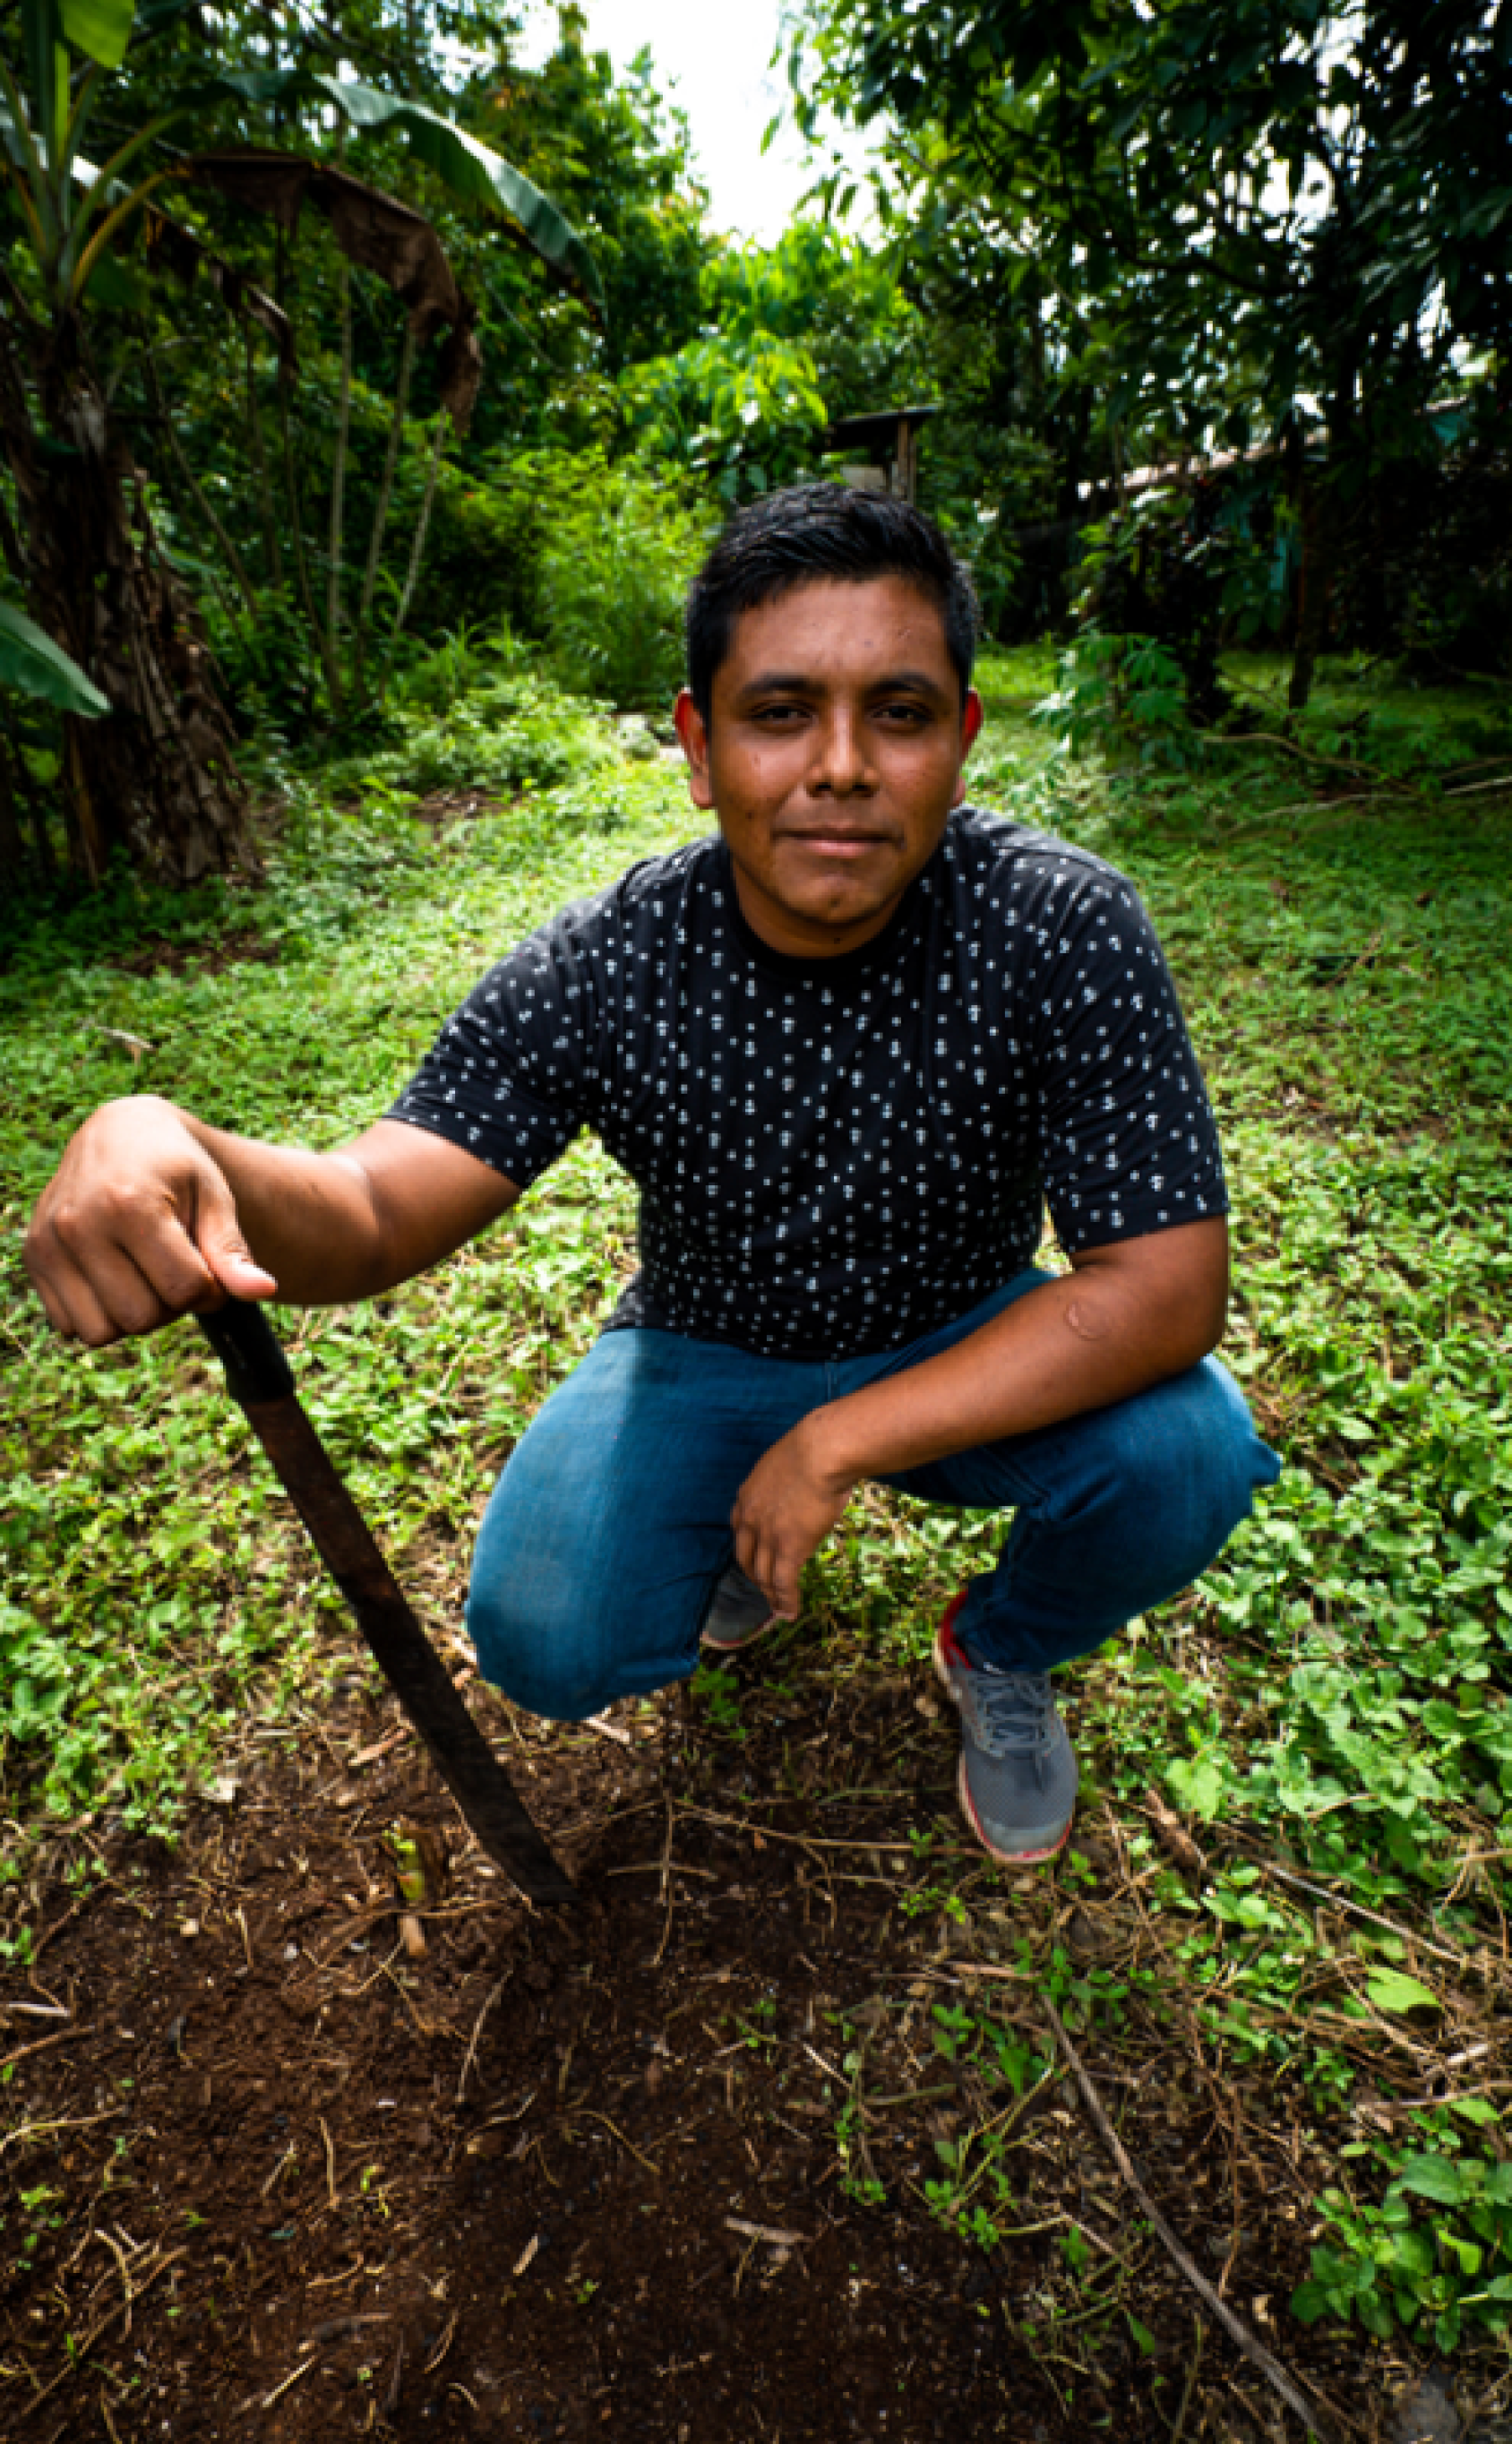 A young man bends down near a shovel in a green patch field with trees.